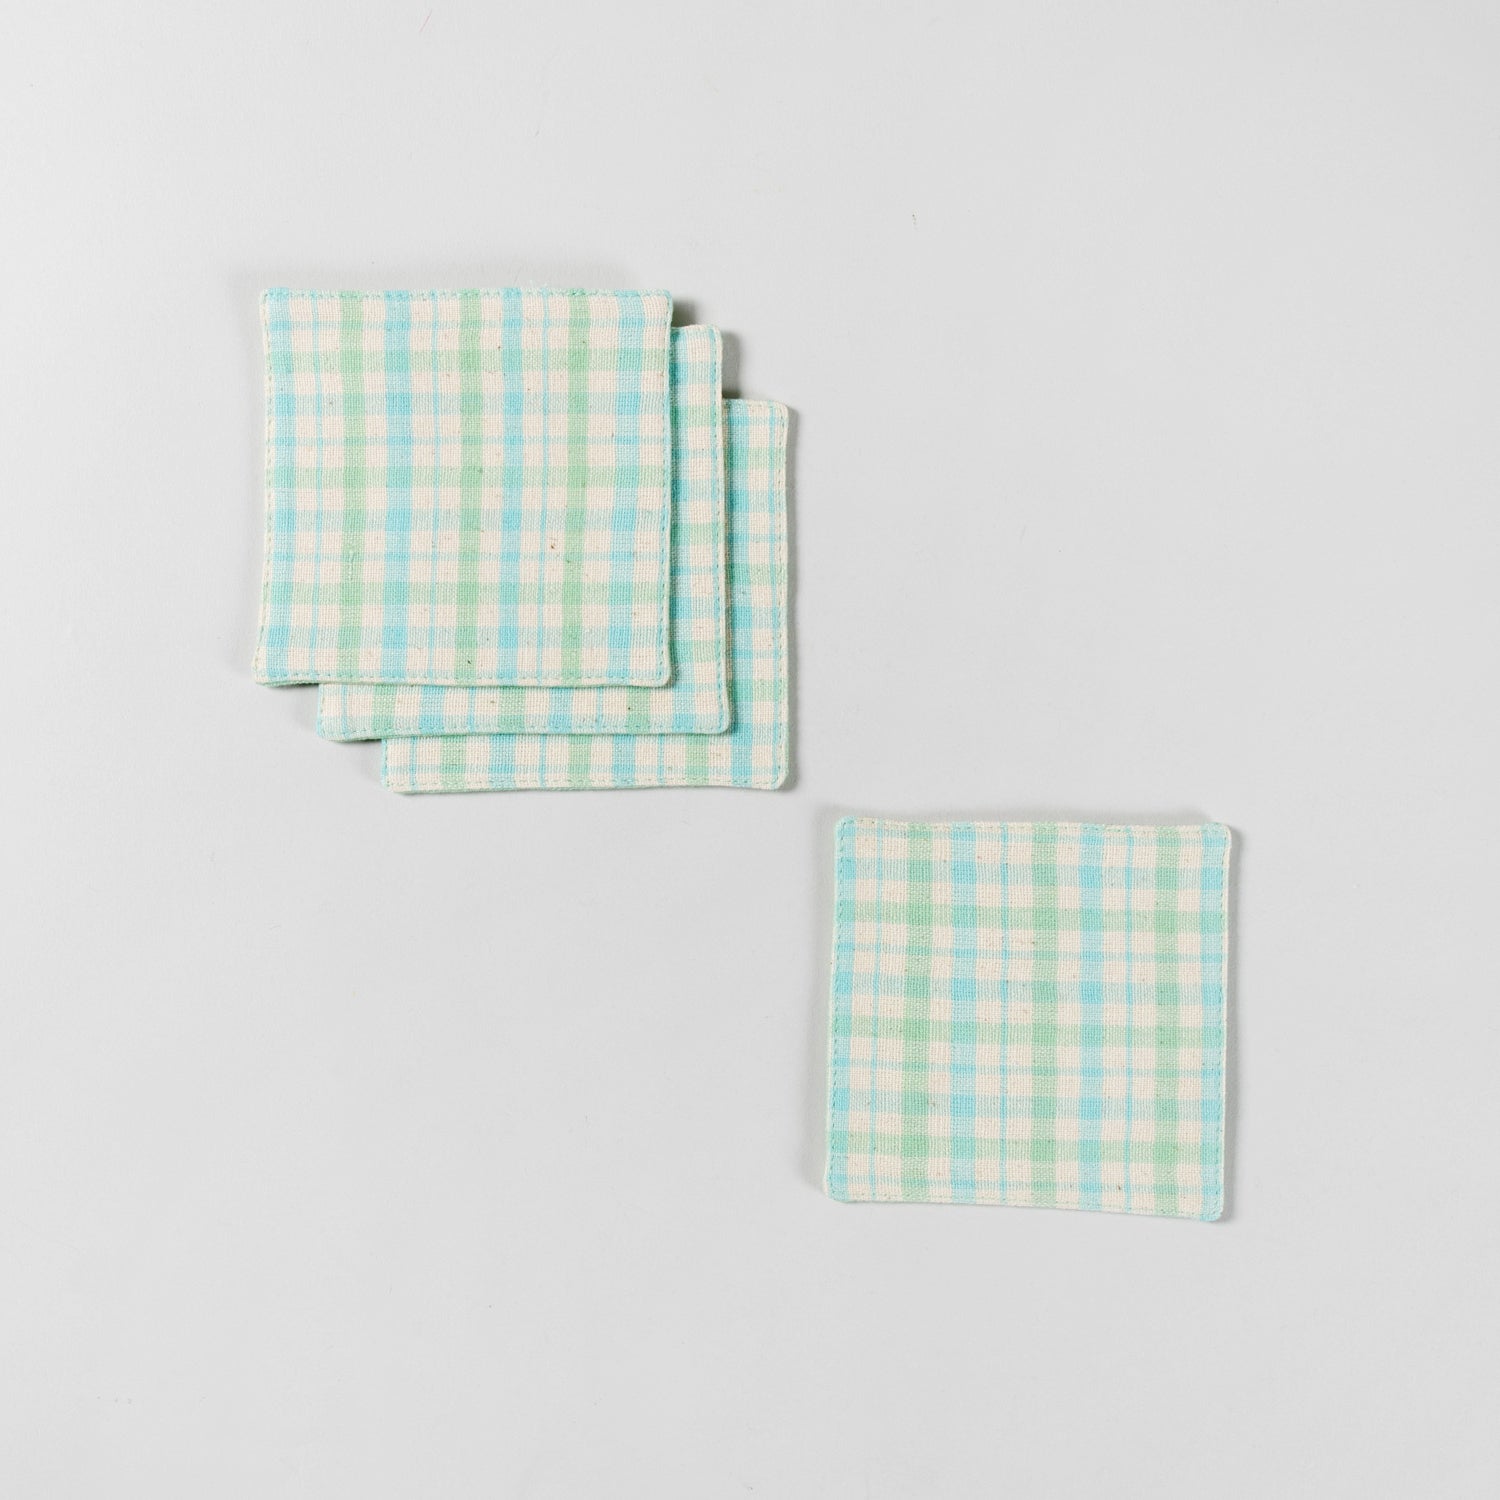 Hand Woven Blue/Green Fabric Coasters Set of 4 - 4x4